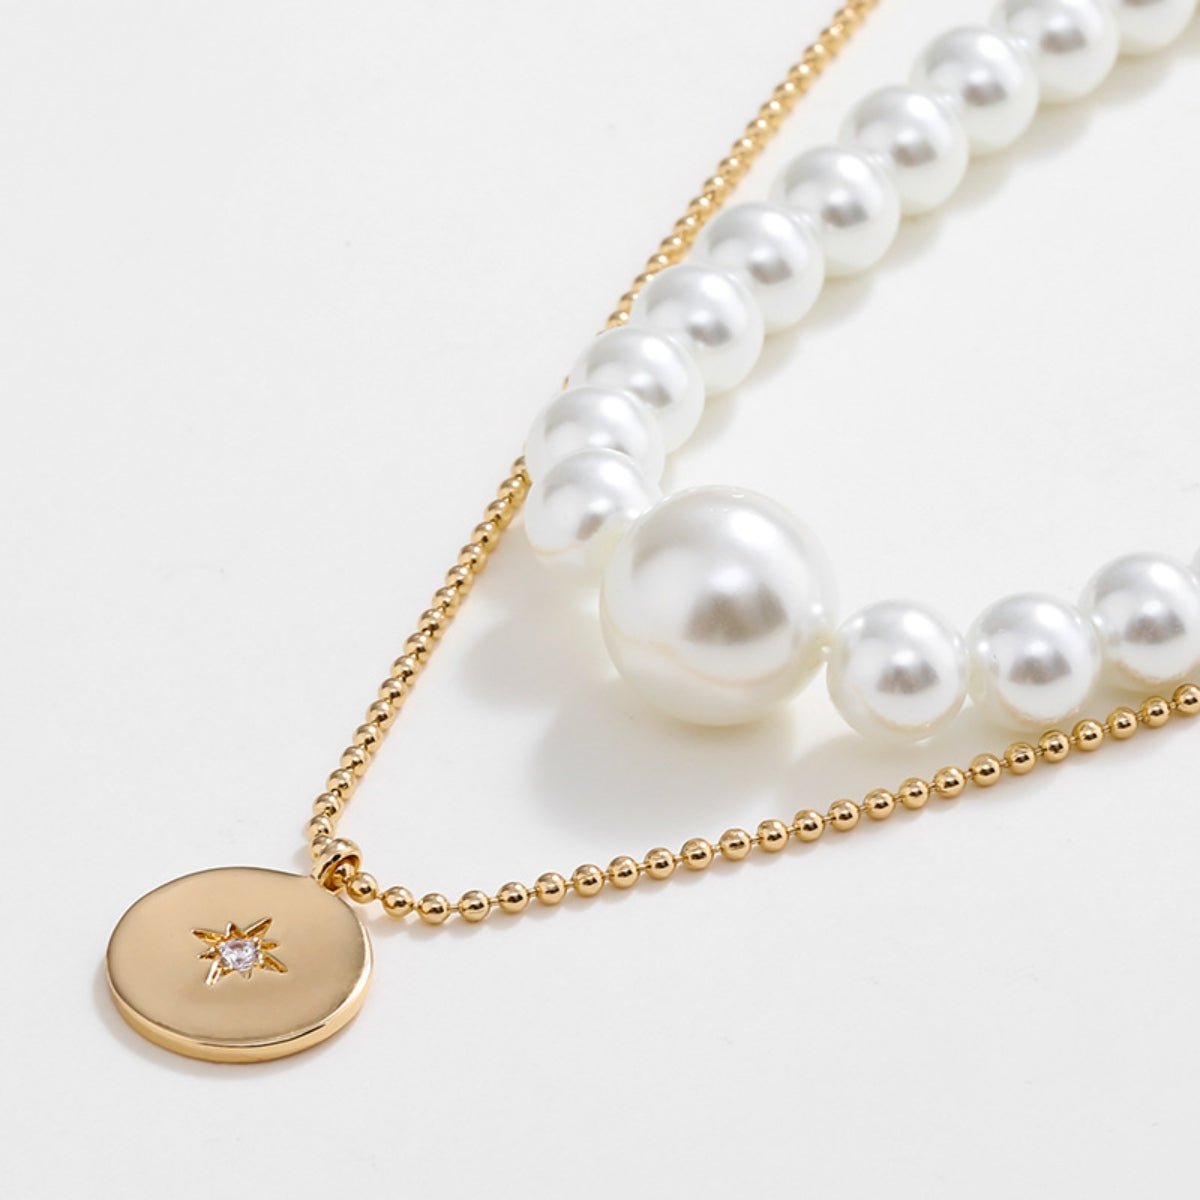 Divine Treasure Pearl Necklace with Pendant #Firefly Lane Boutique1